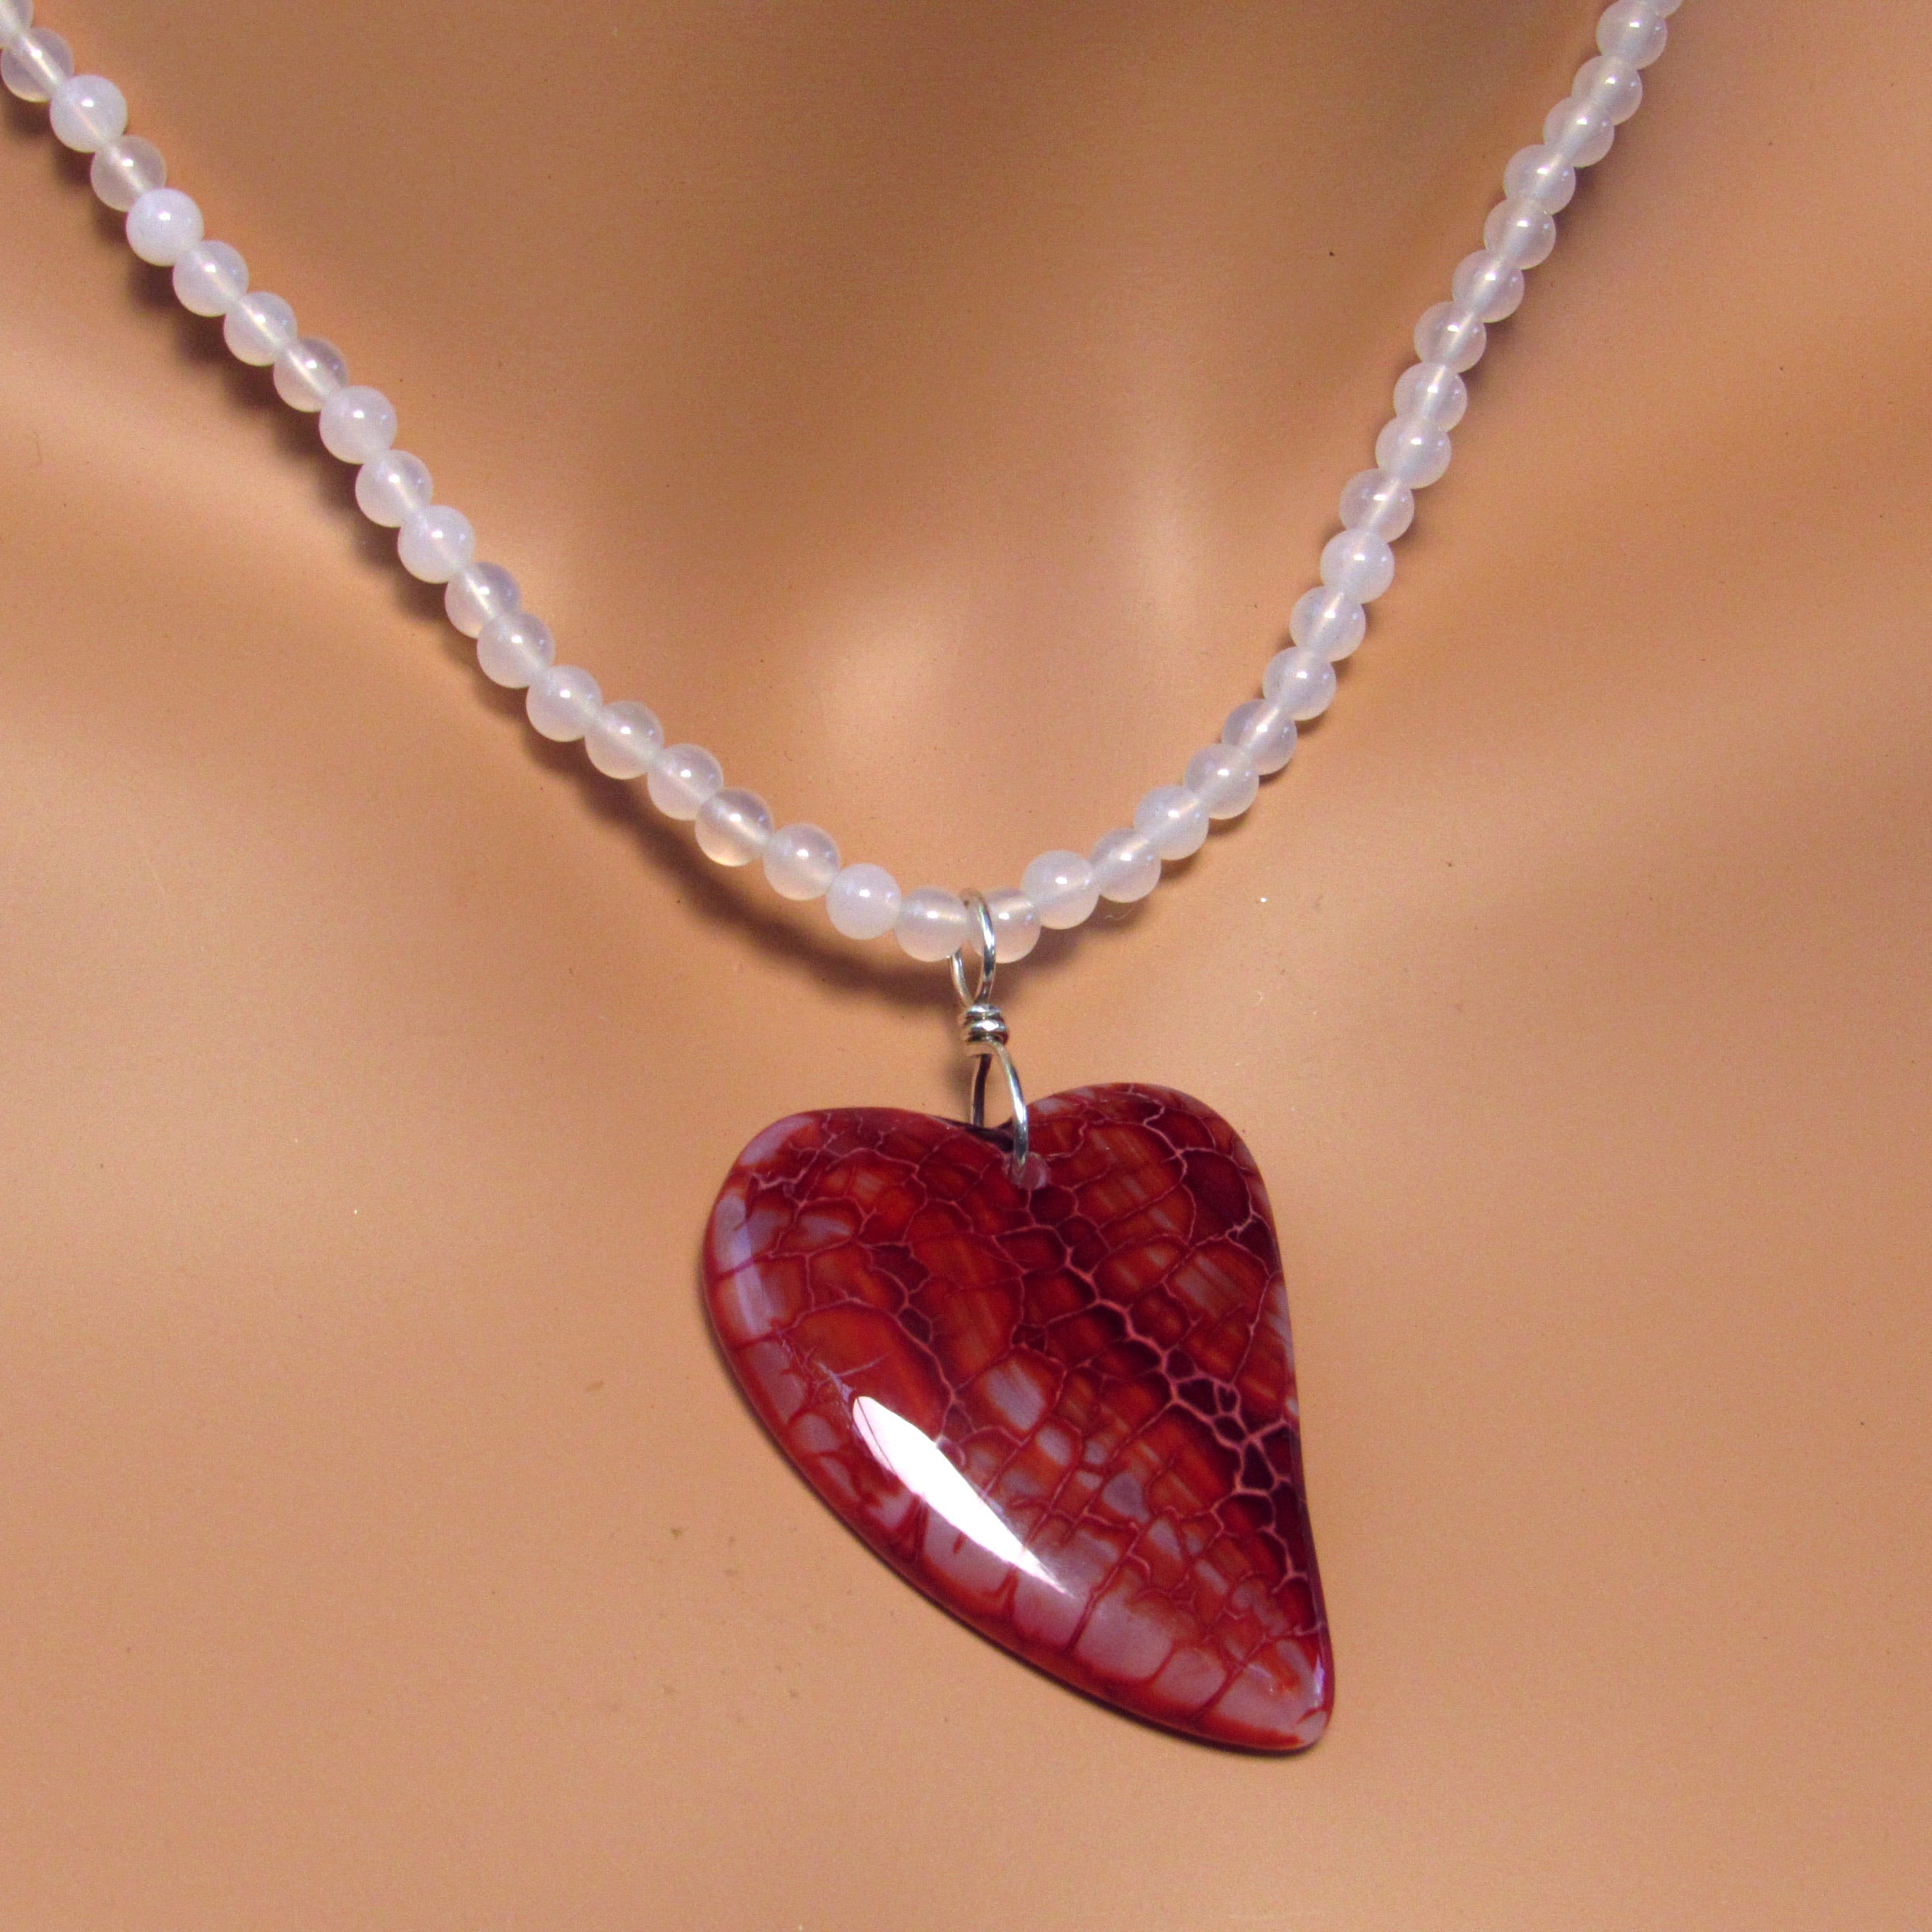 Dragon’s Vein Agate Heart Pendant, White Agate Necklace, W/ Sterling Silver